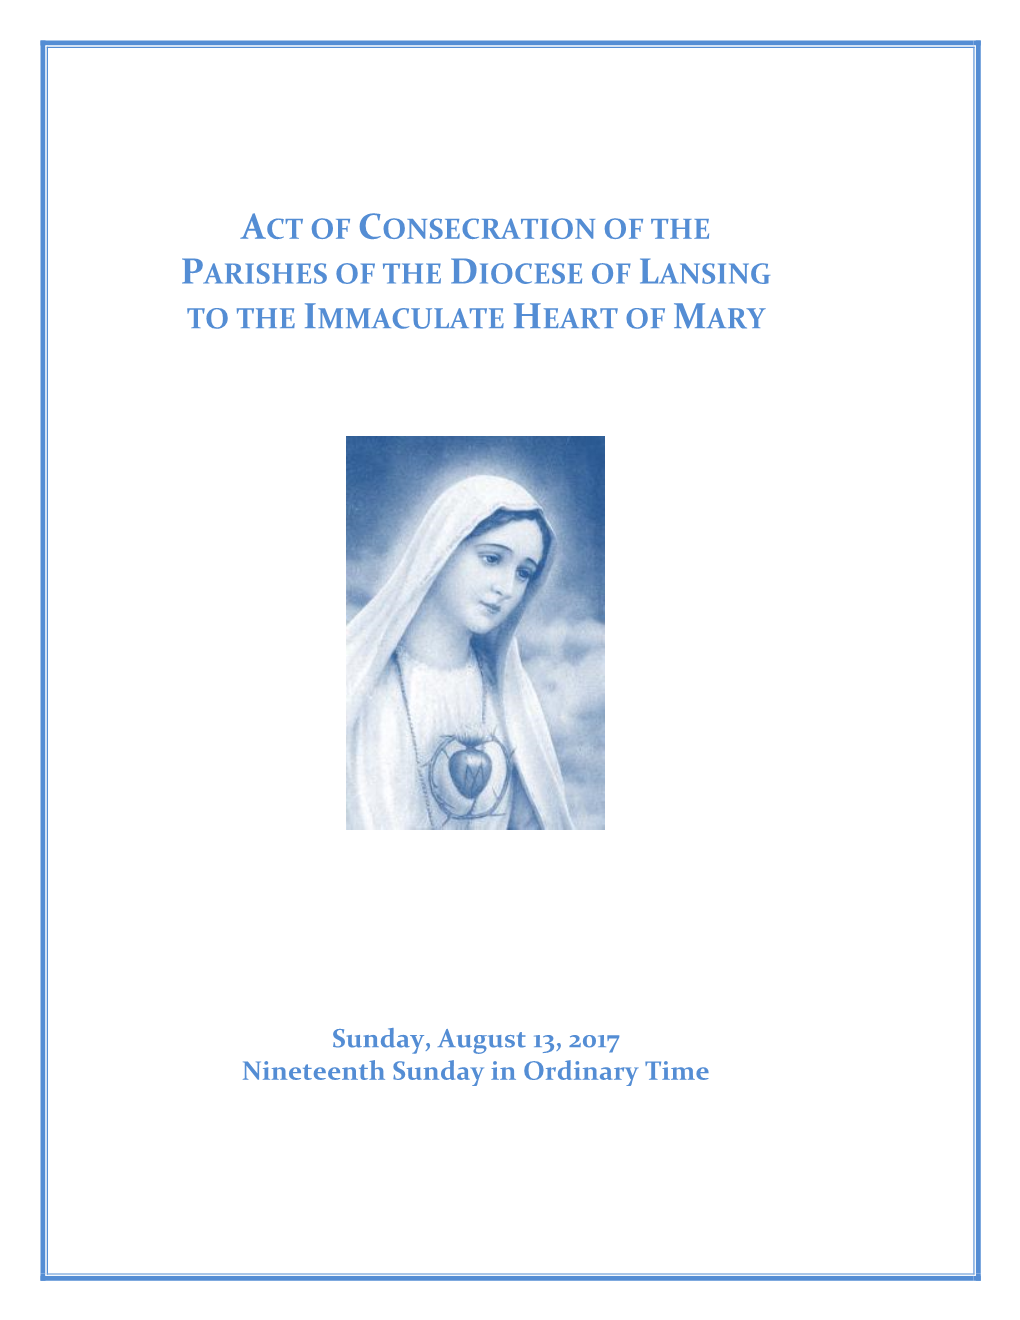 To the Immaculate Heart of Mary